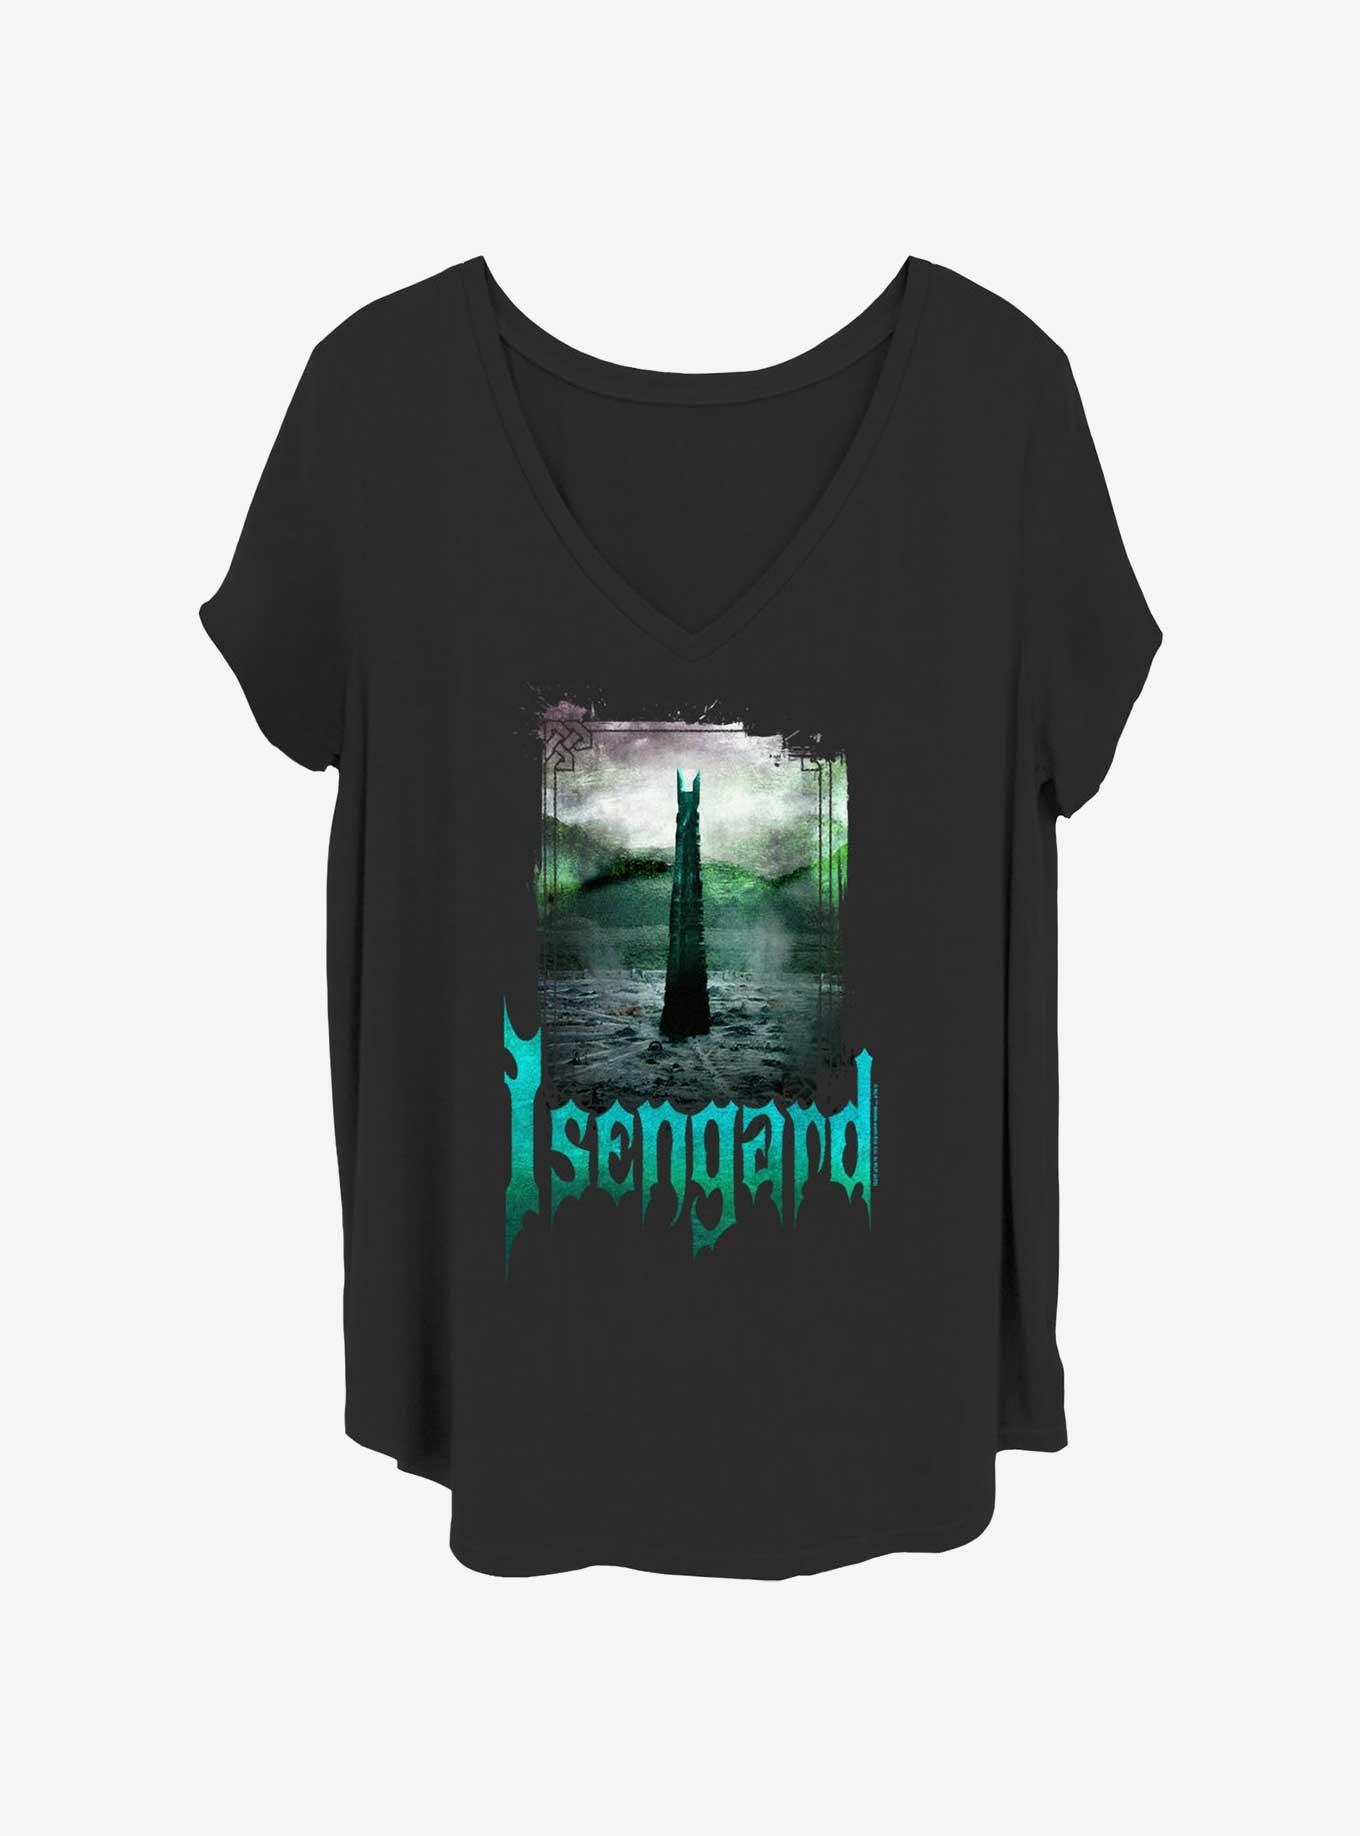 The Lord of the Rings Desination Isengard Girls T-Shirt Plus Size, BLACK, hi-res